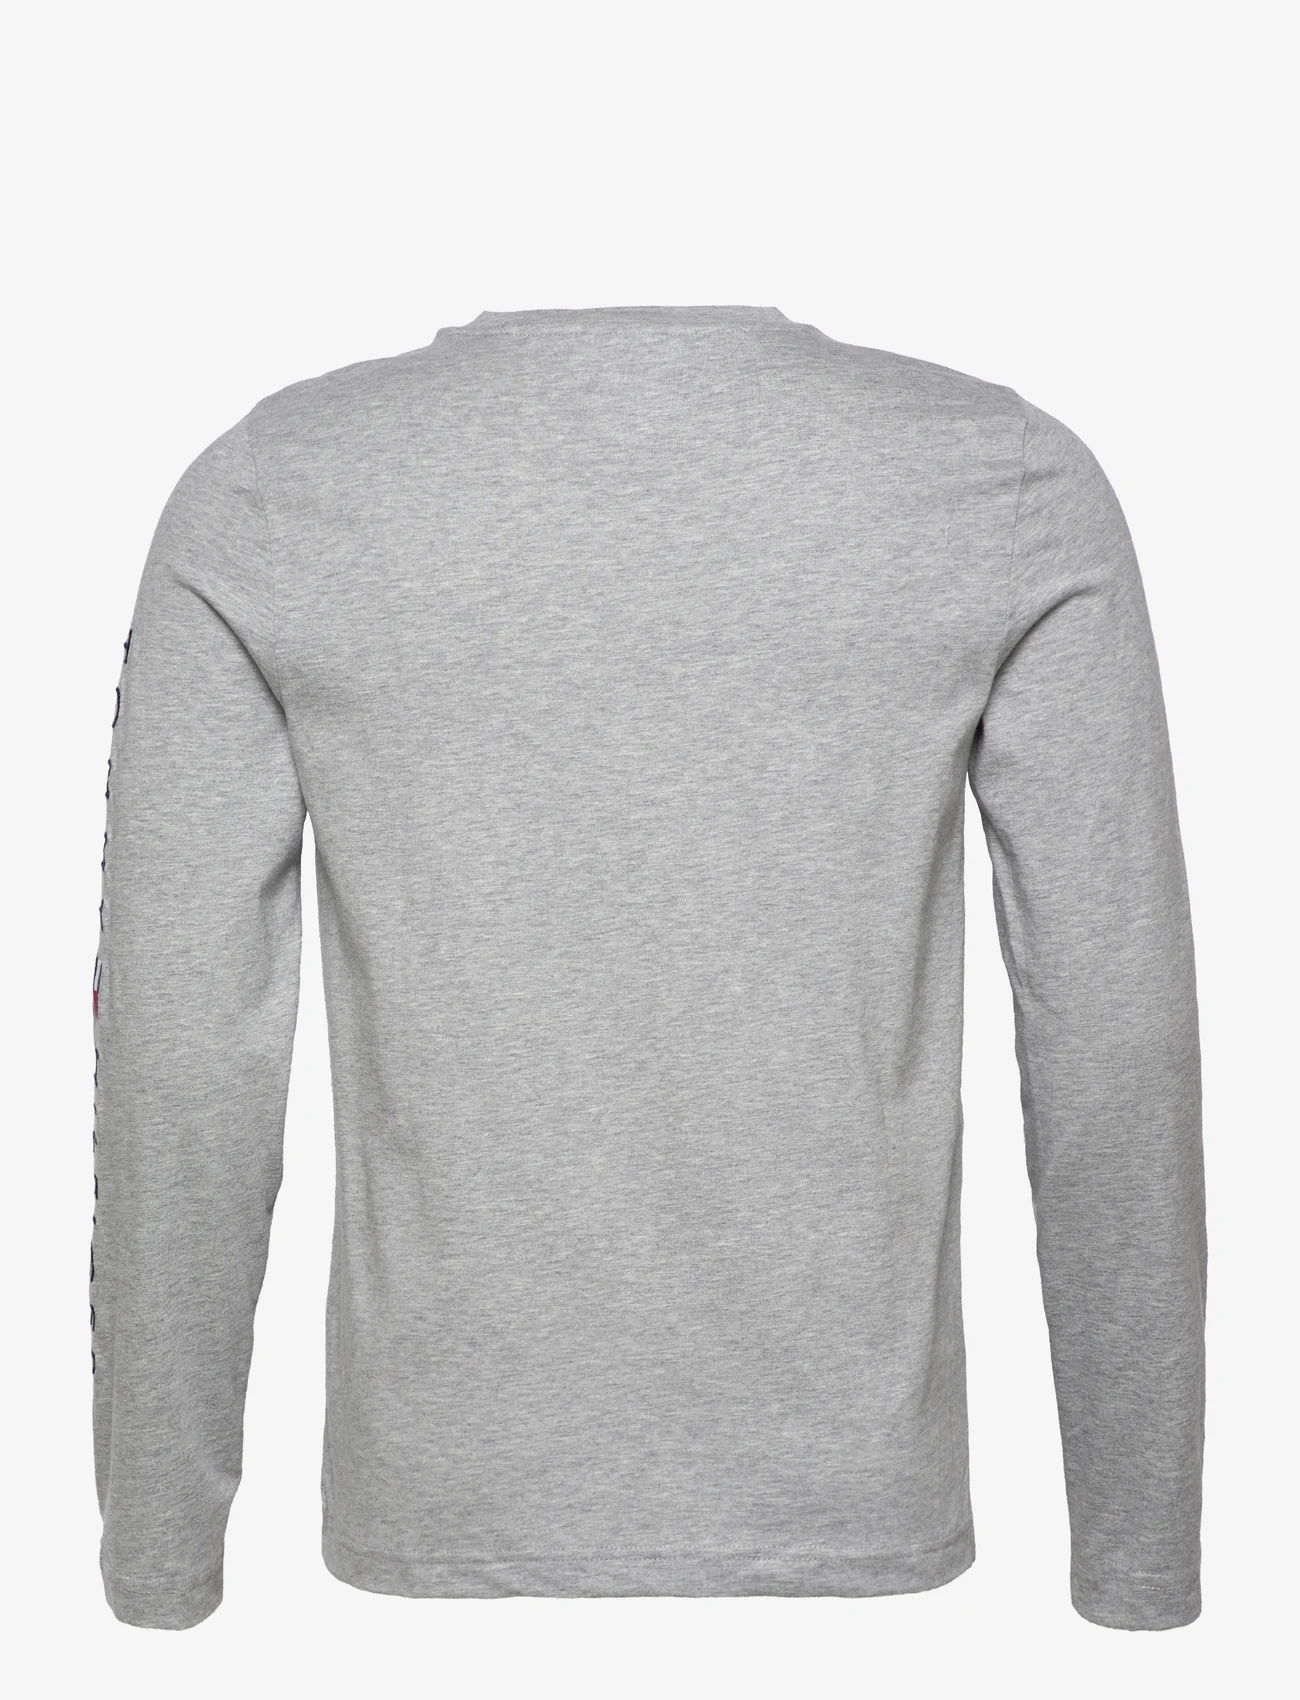 Tommy Hilfiger - TOMMY LOGO LONG SLEEVE TEE - perus t-paidat - light grey heather - 1